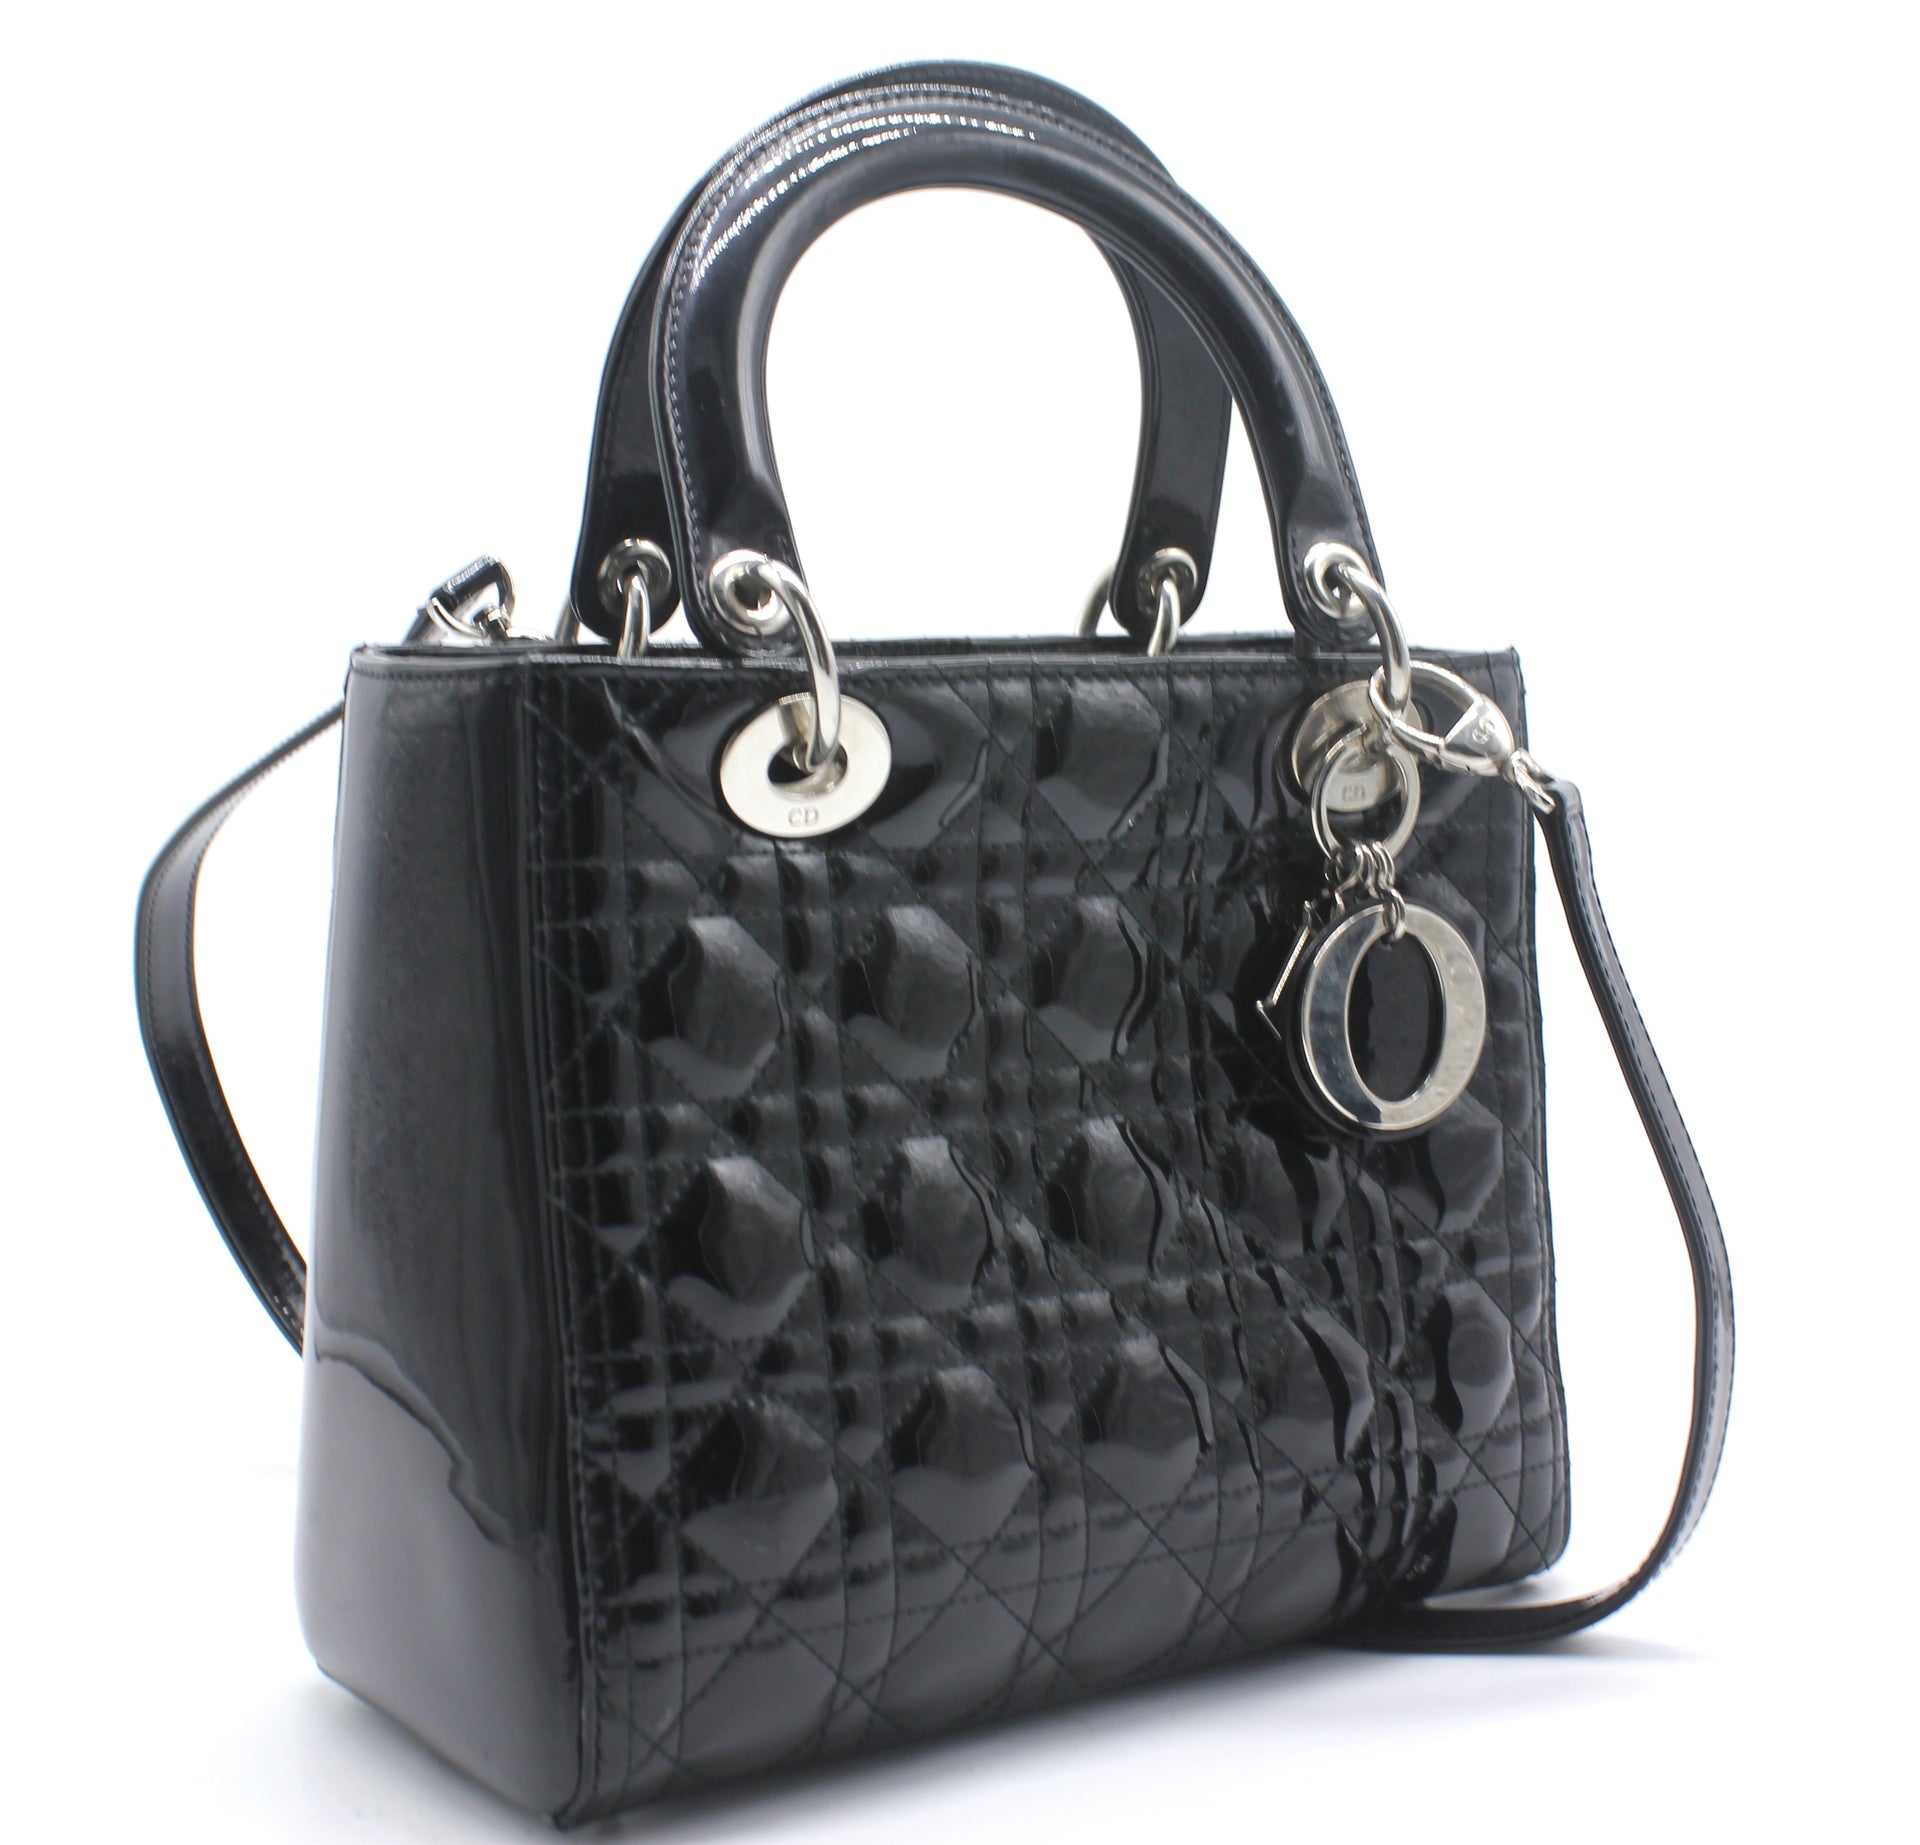 Authentic Second Hand Christian Dior Lady Dior Patent Leather Bag  PSS19000126  THE FIFTH COLLECTION